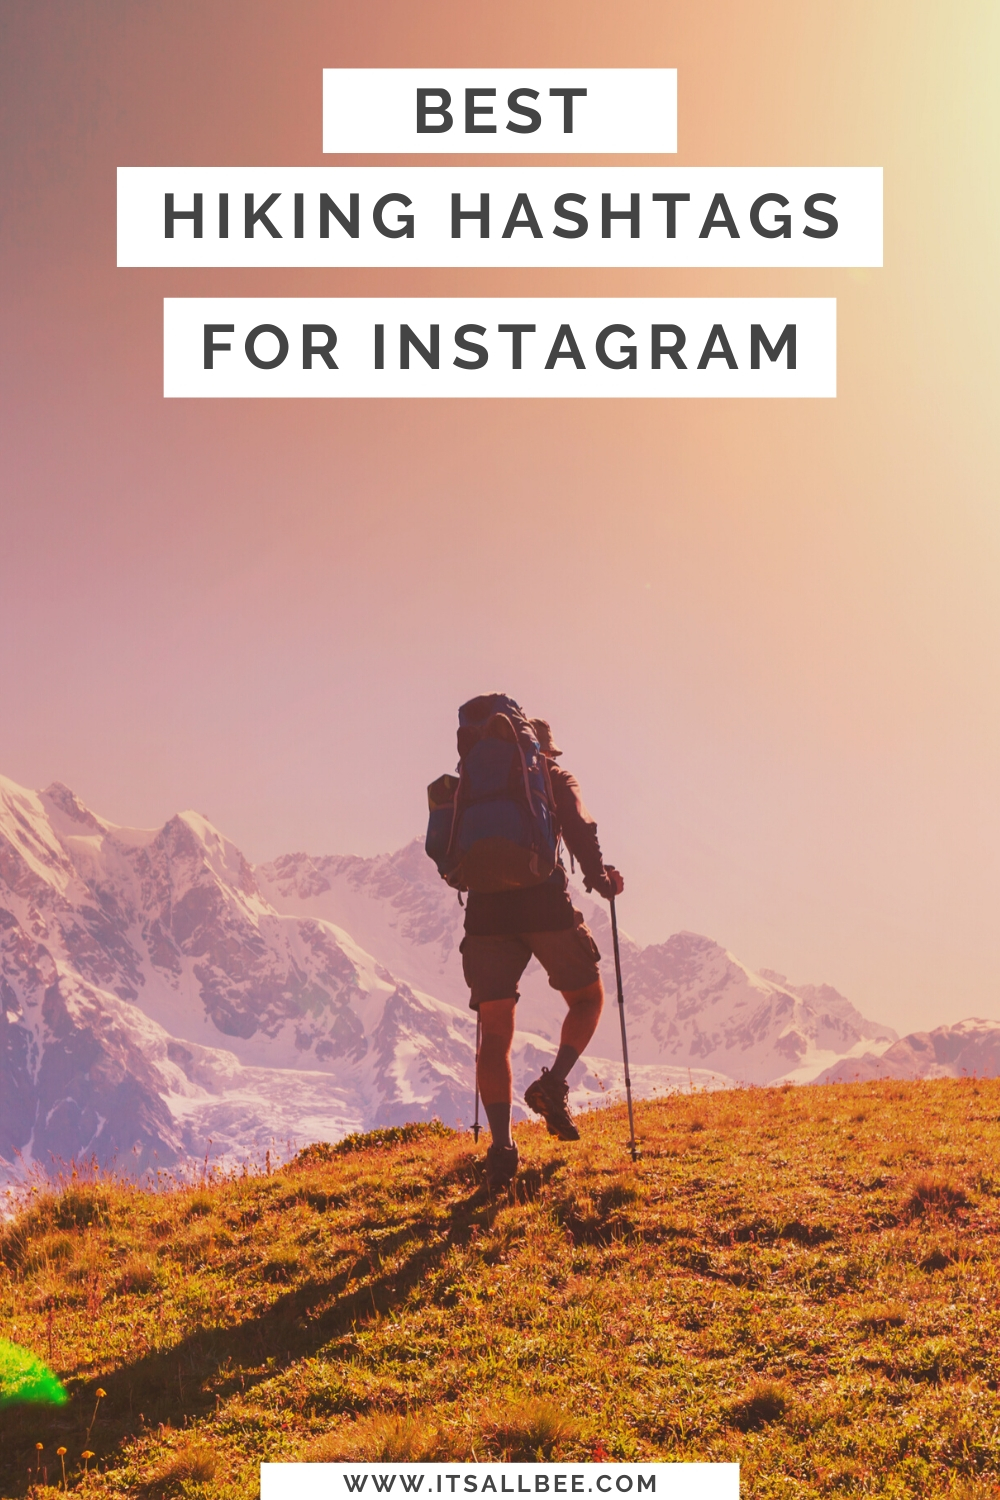 The Best Hiking Hashtags For Instagram Perfect For Outdoors & Nature - ItsAllBee Solo Travel Adventure Tips